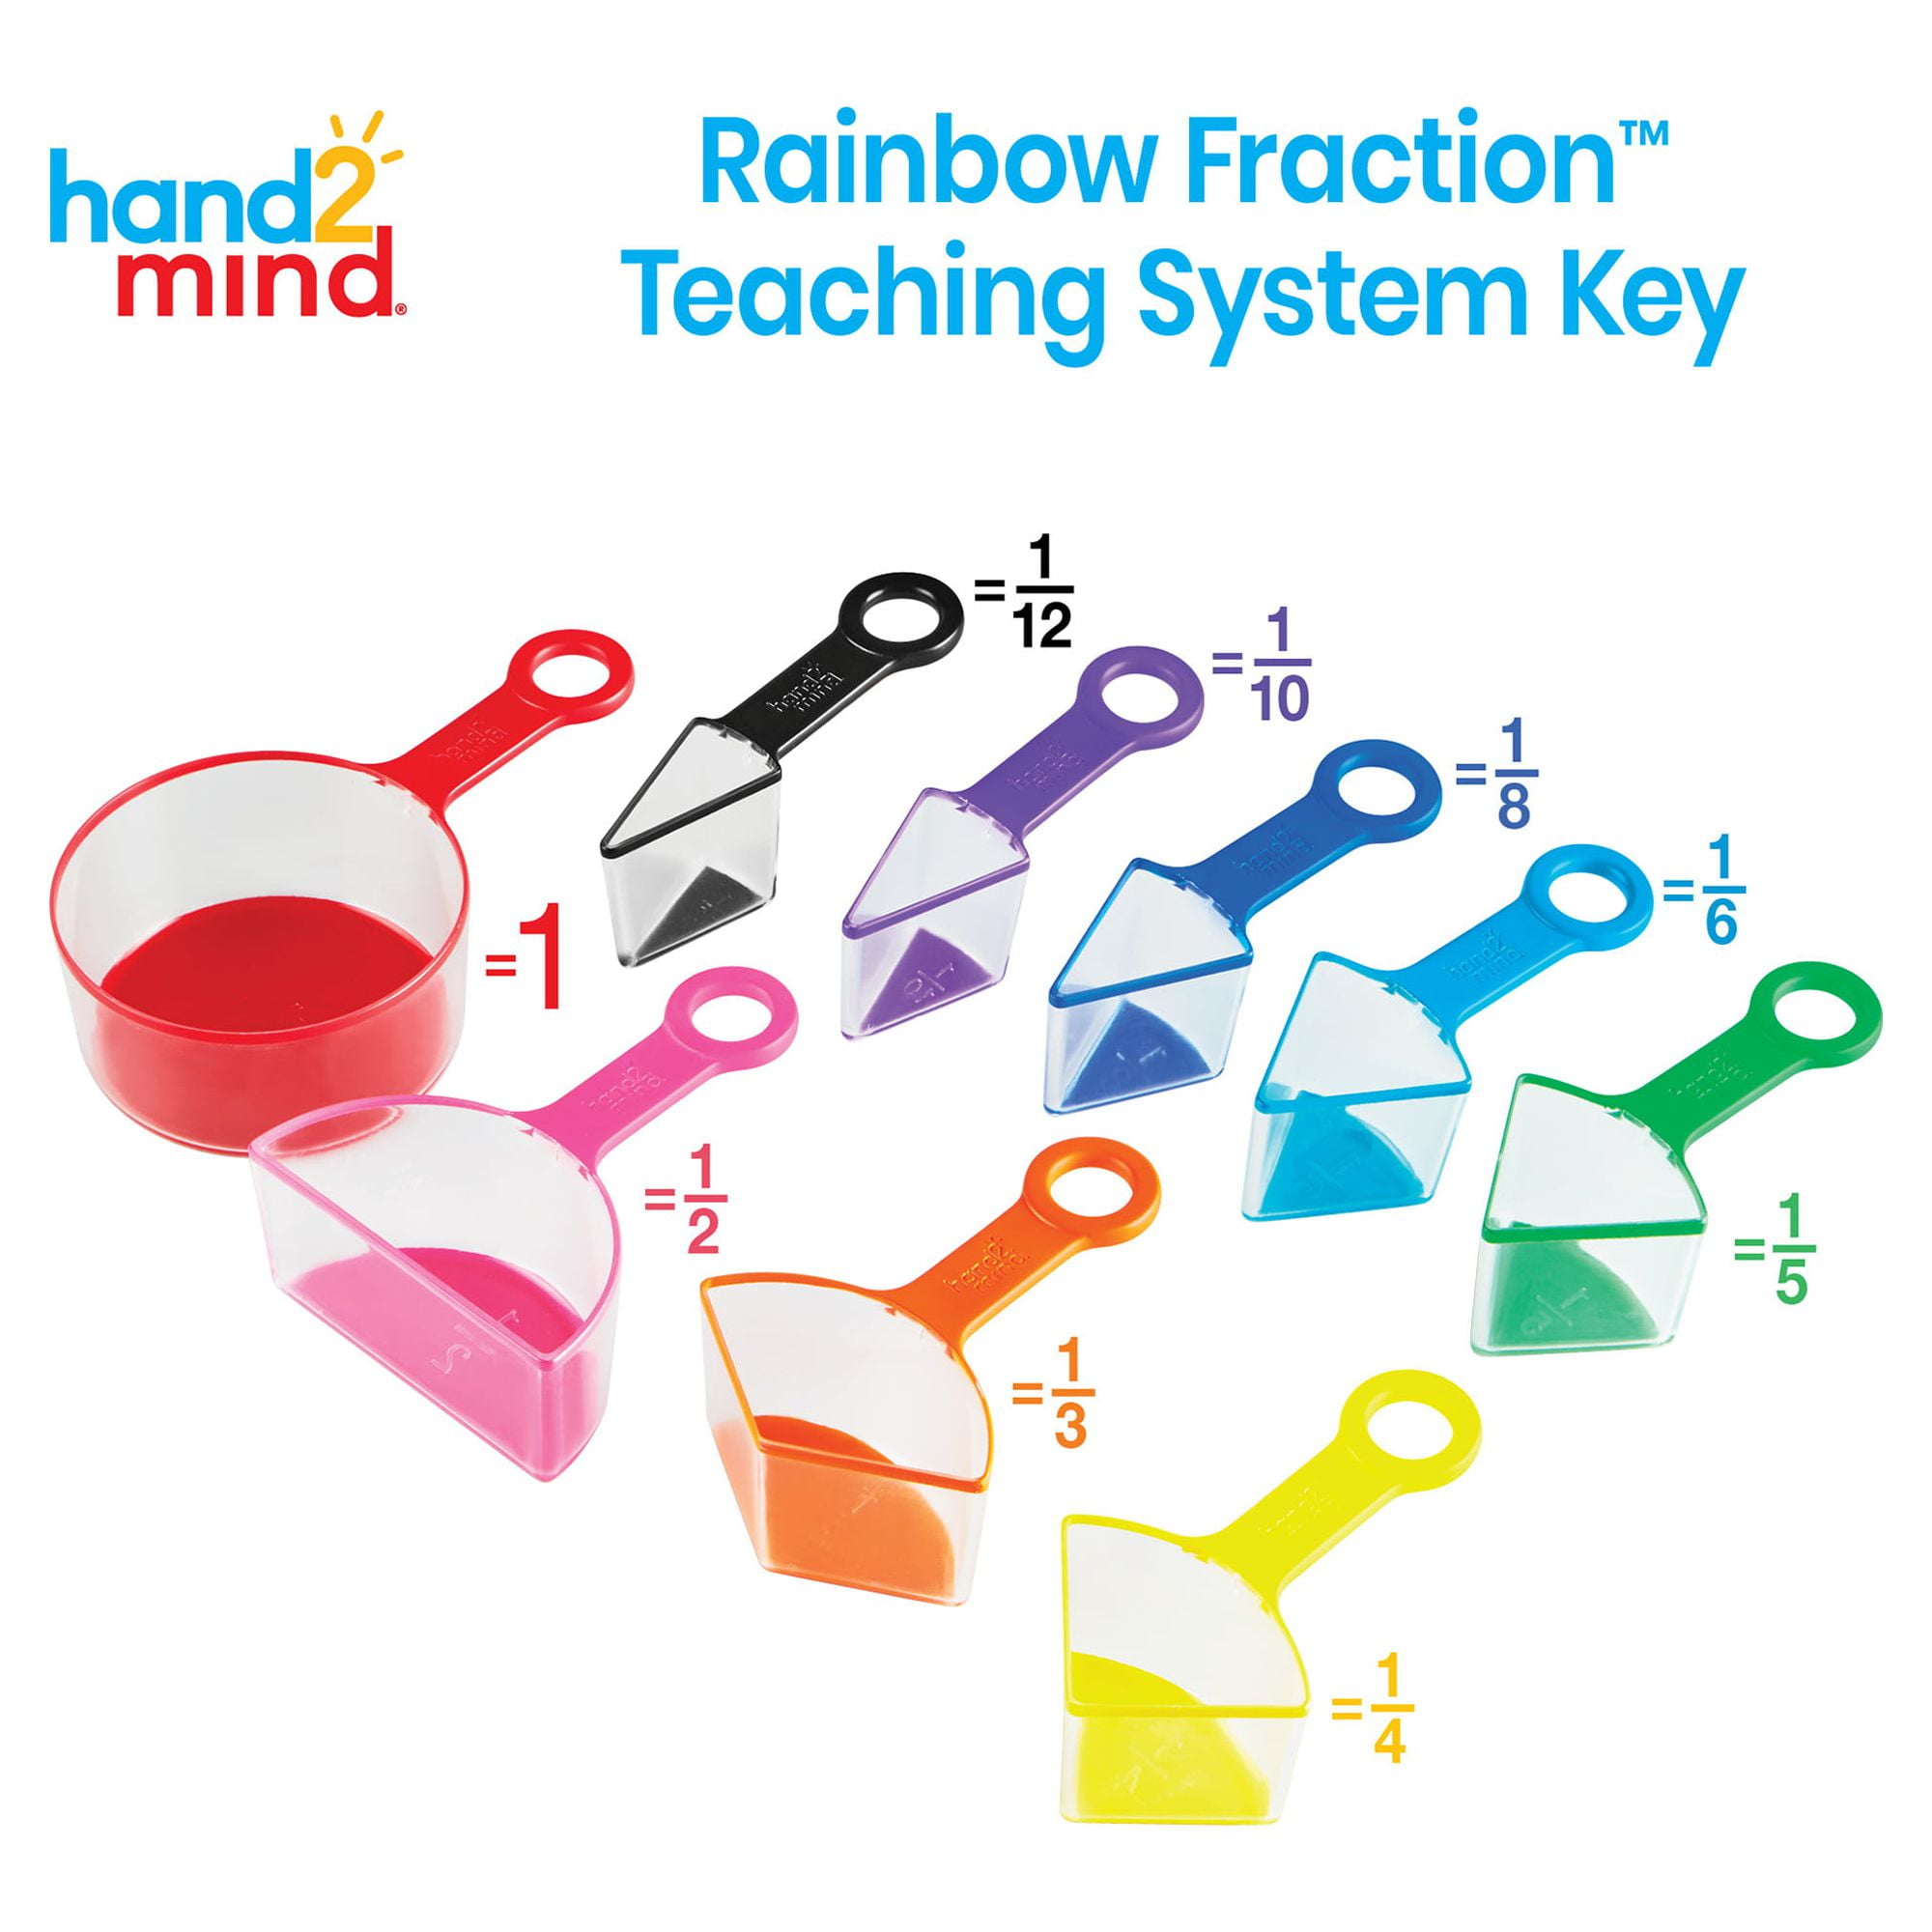 hand2mind-93439 Rainbow Fraction Measuring Cups, Fractions Manipulatives,  Kids Measuring Cups, 4th Grade Math Manipulatives, Baking Supplies for  Kids